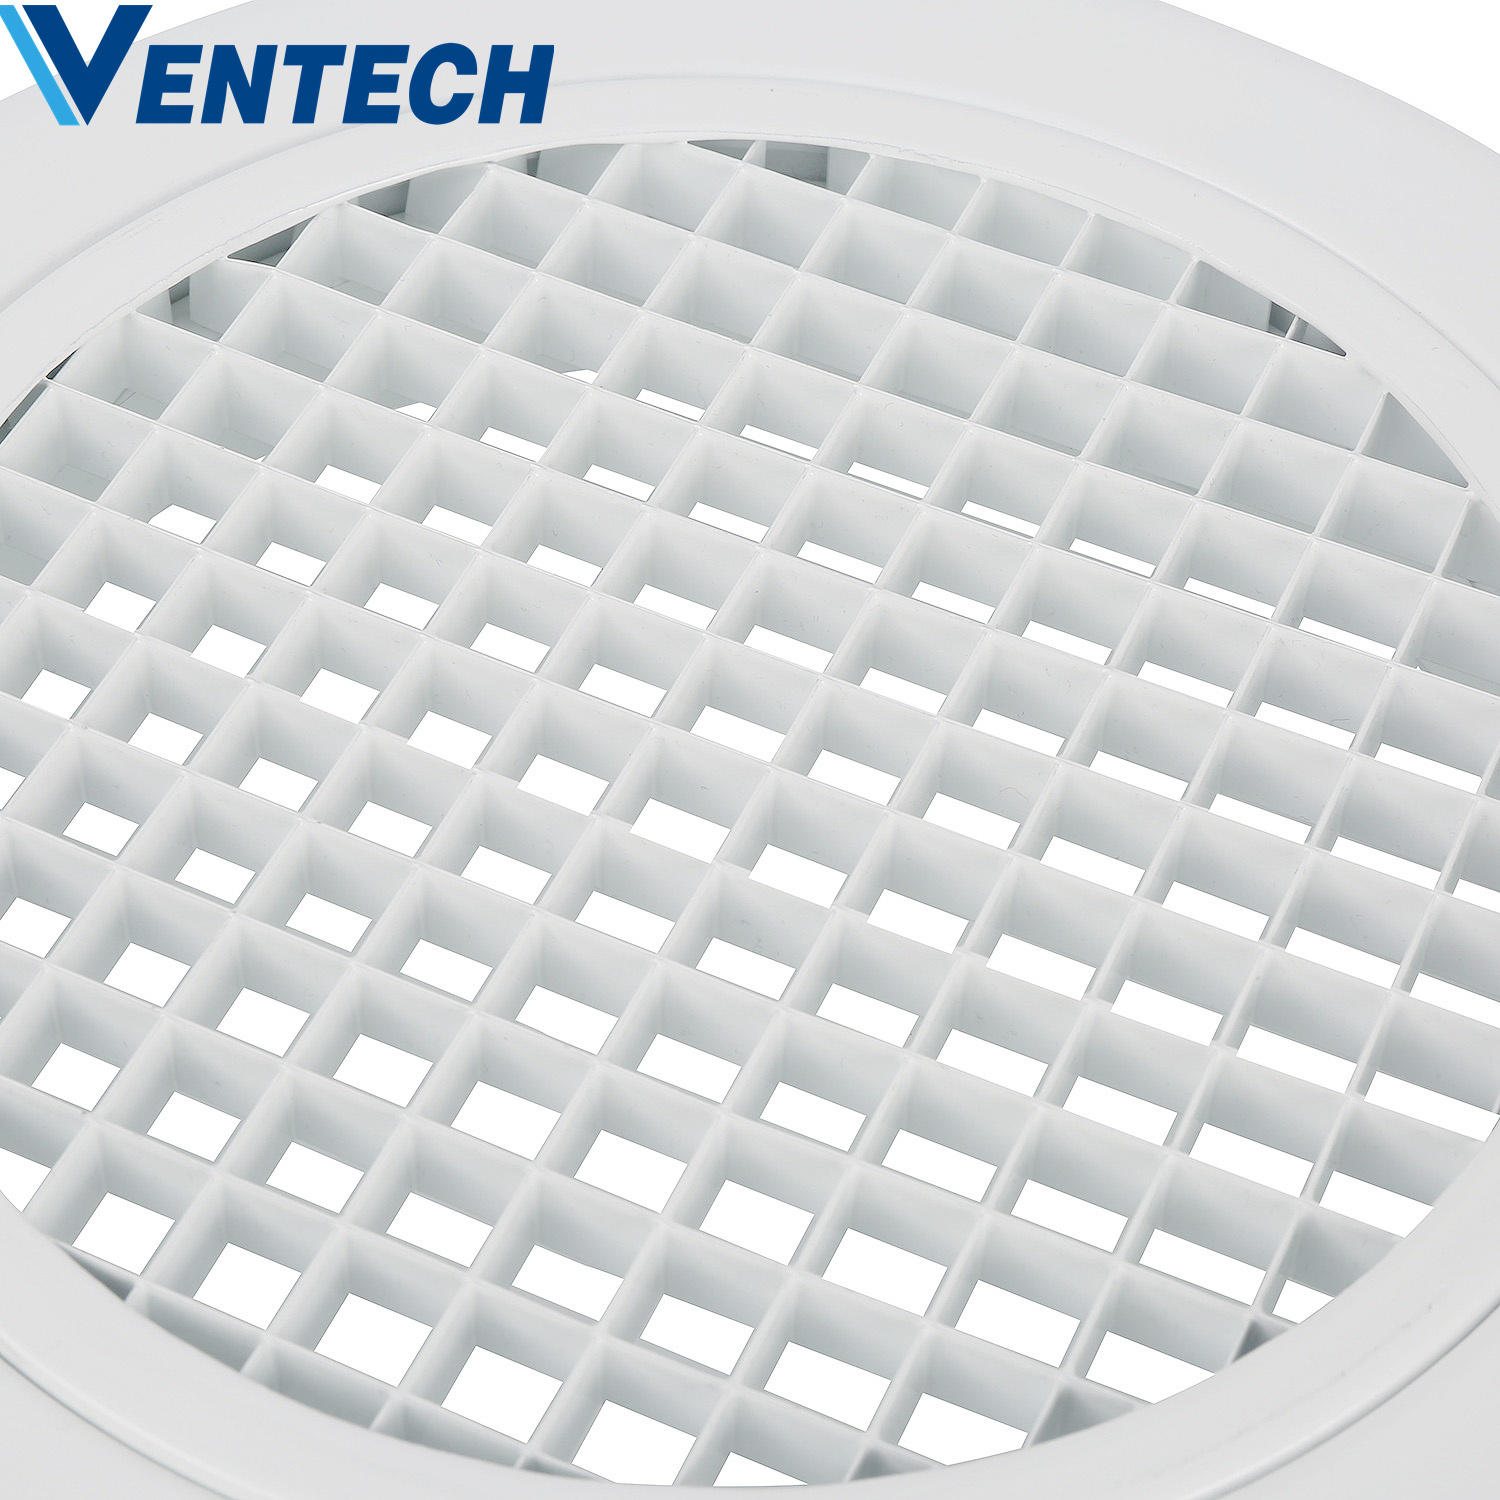 VENTECH Abs Ceiling Air Vent Circular Diffuser Plastic Round Eggcrate Grilles For Kitchen Ventilation